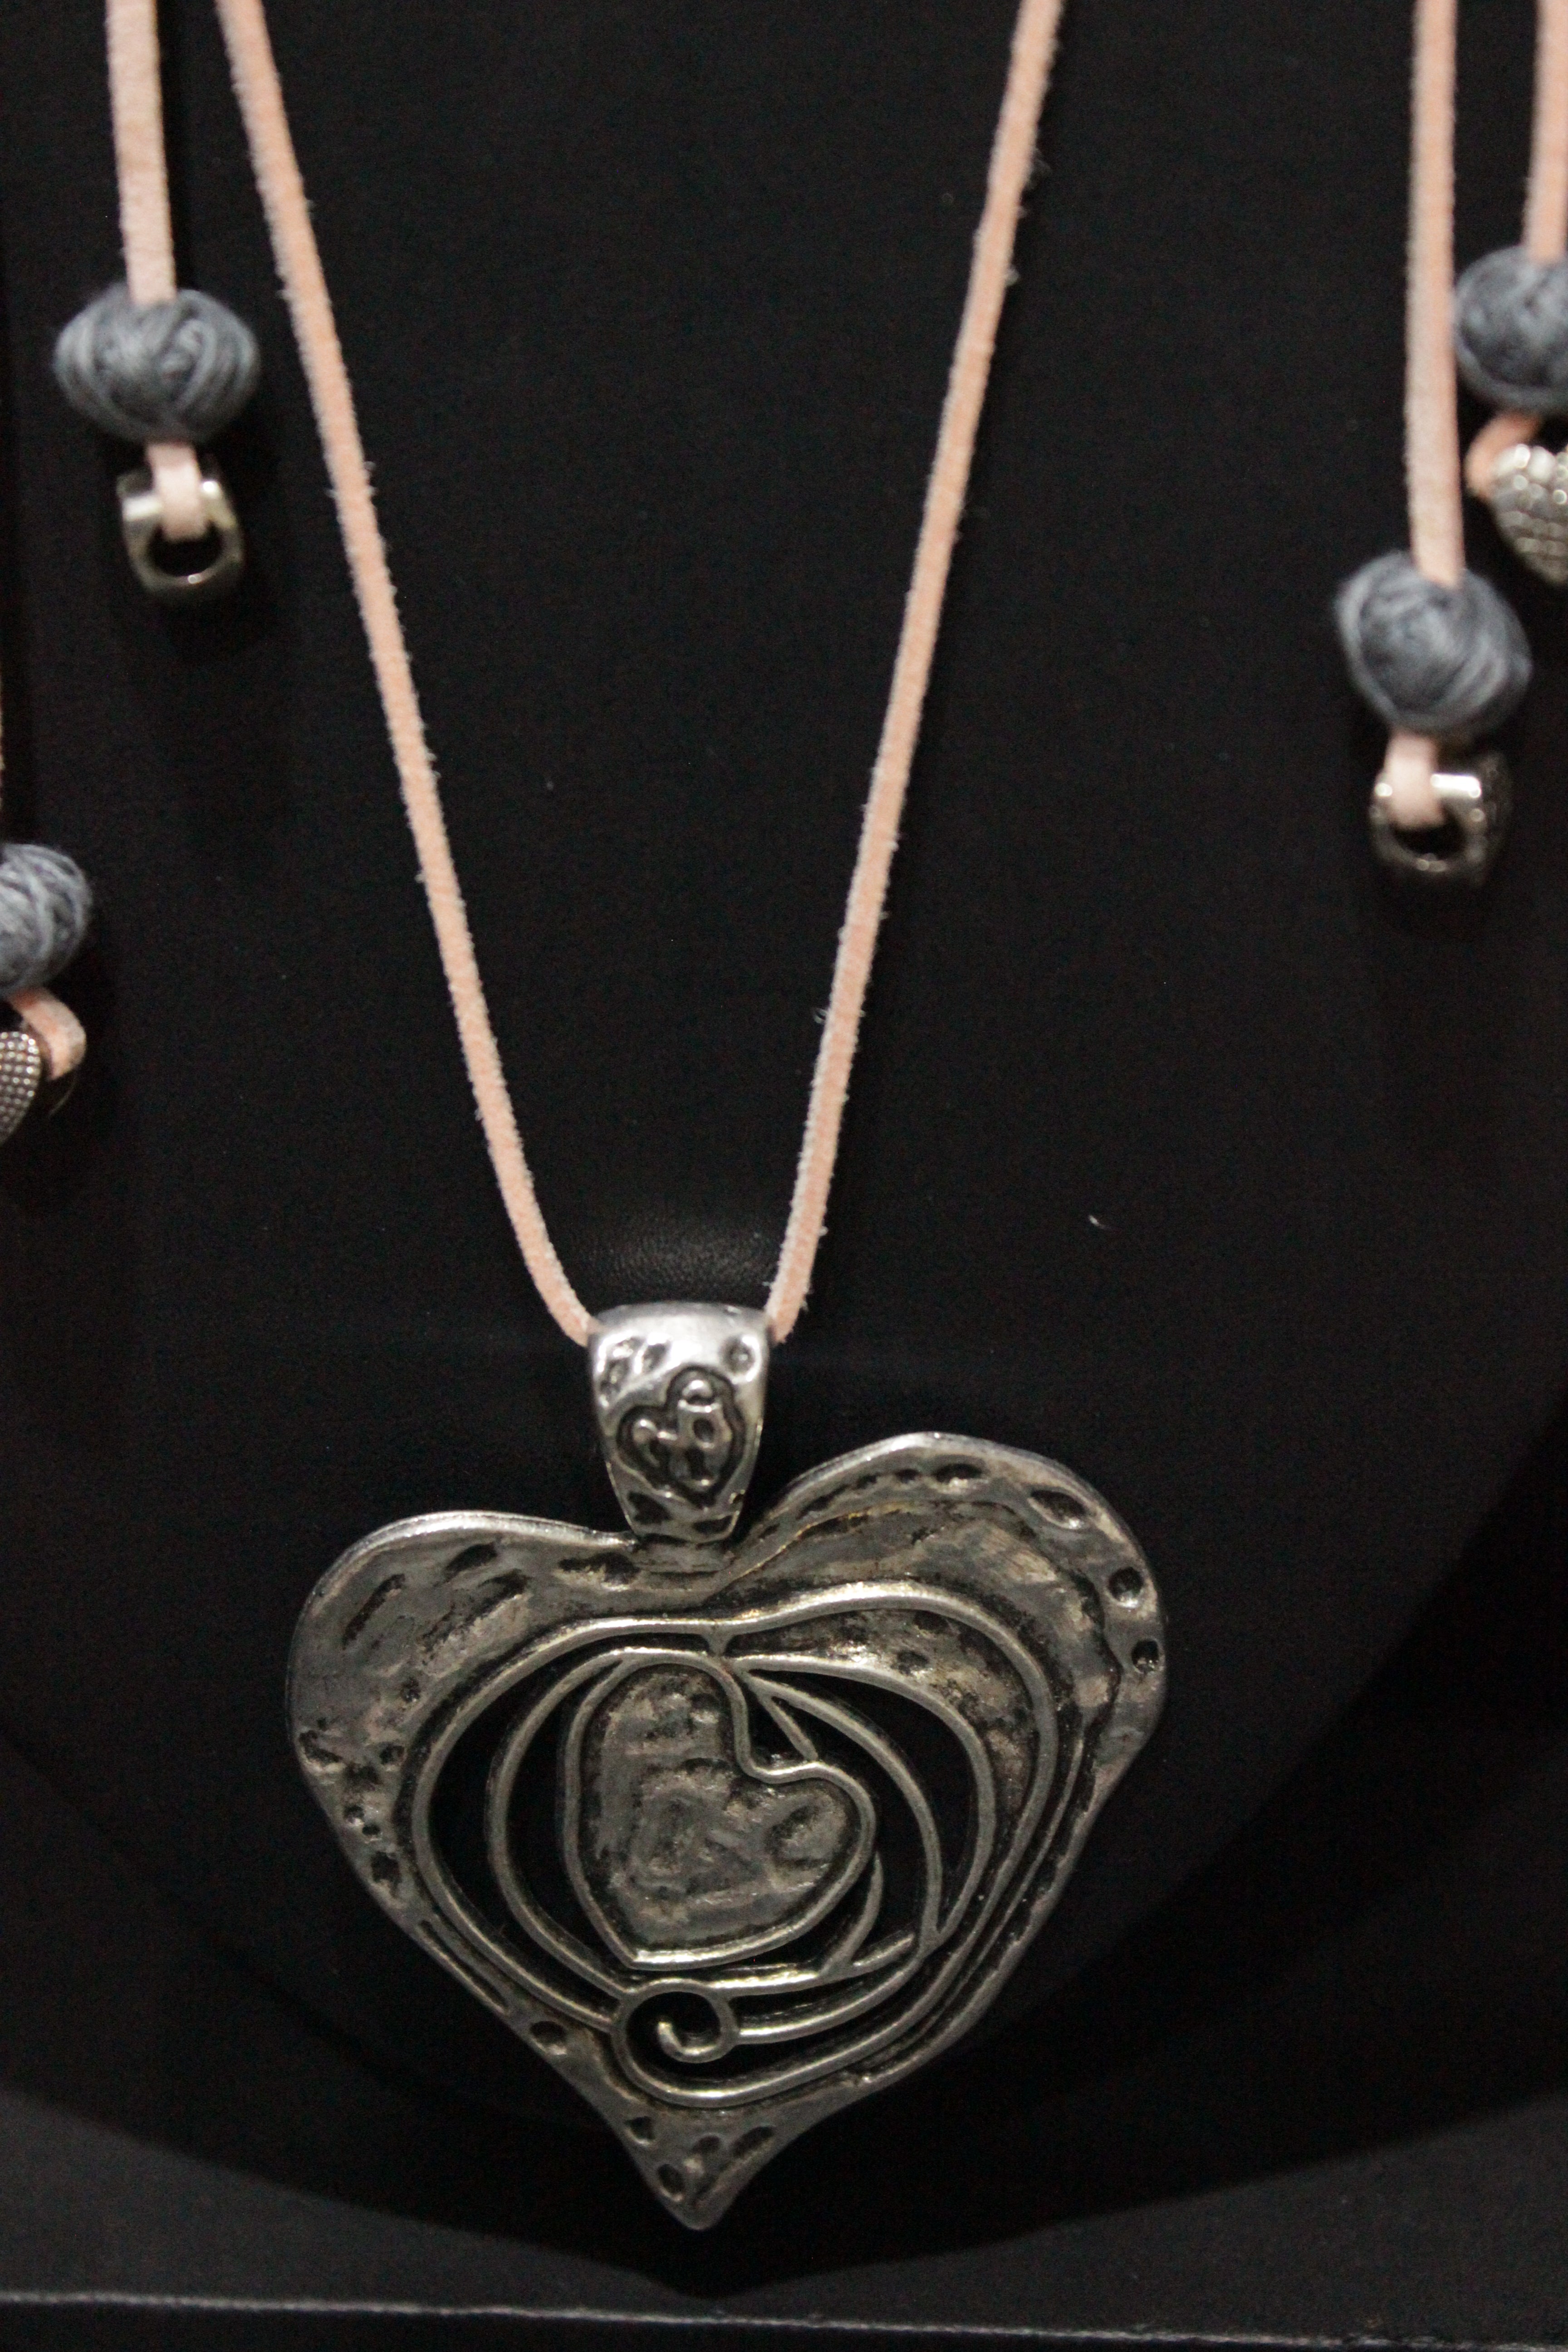 Oxidised Silver Finish Heart Shaped Pendant Rope Closure Necklace Set with Metal Accents